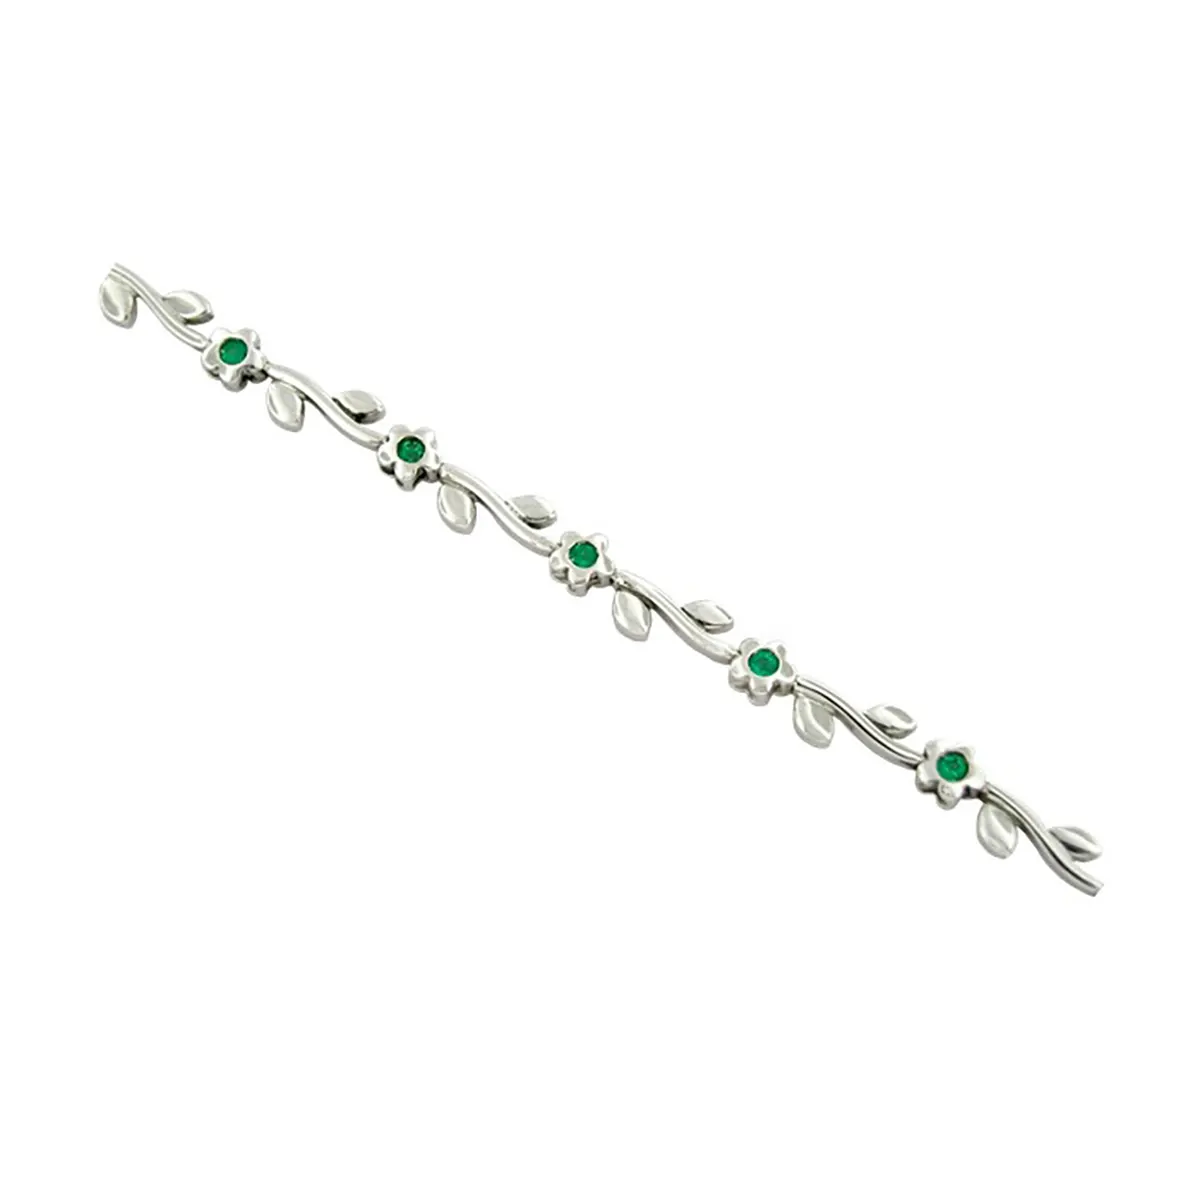 White gold emerald bracelet with 11 small round cut emeralds set in smooth bezel setting in the the center of flowers designs